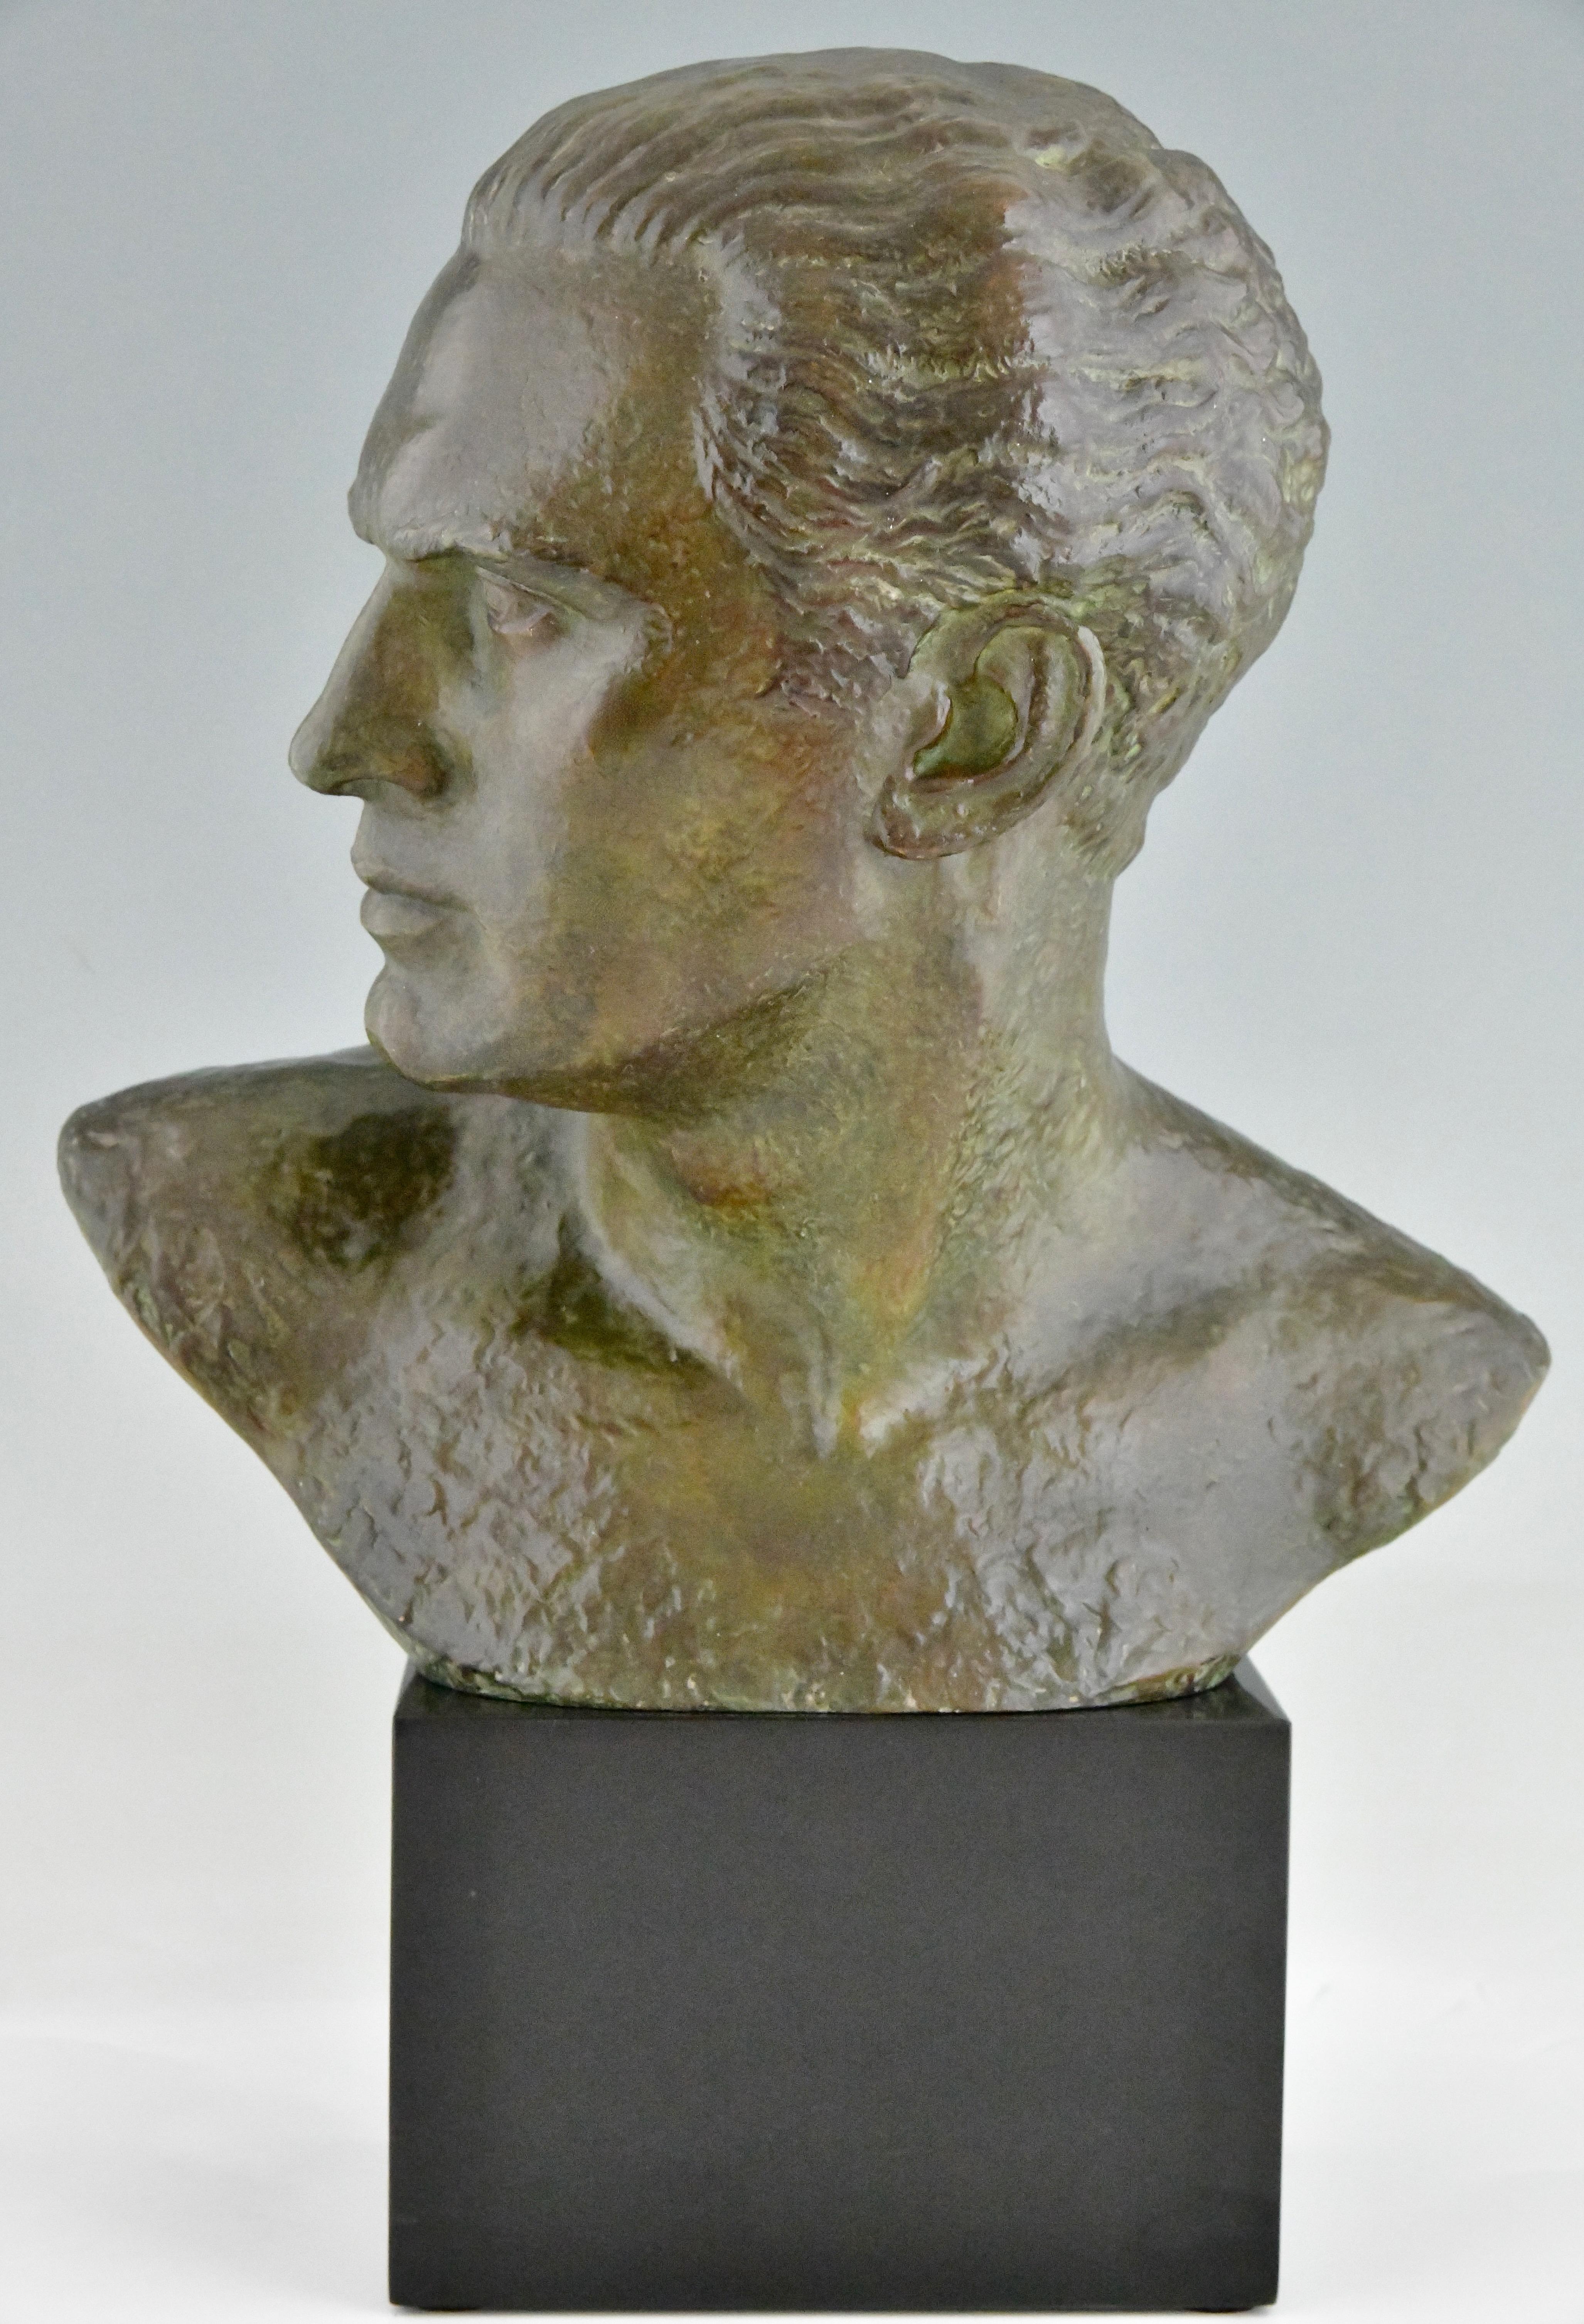 Art Deco bronze sculpture male bust aviator Jean Mermoz by Lucien Gibert. 
The sculpture has a lovely green patina and stands on a Belgian Black marble base.
Impressive size. France 1925.
A similar model is illustrated in  
Bronzes, sculptors and